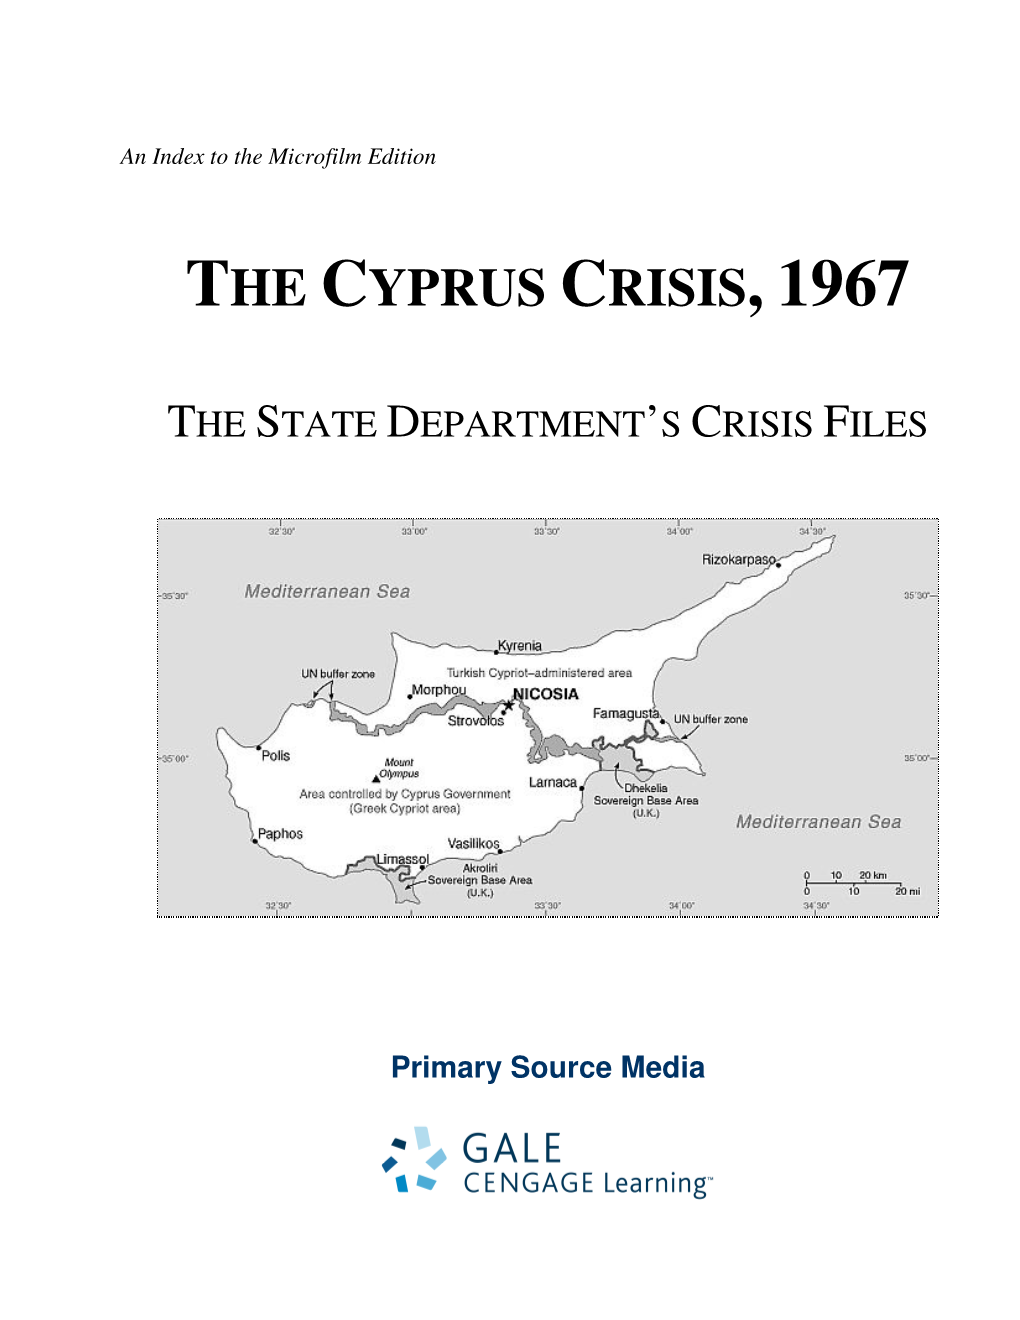 The Cyprus Crisis, 1967: the State Department’S Crisis Files